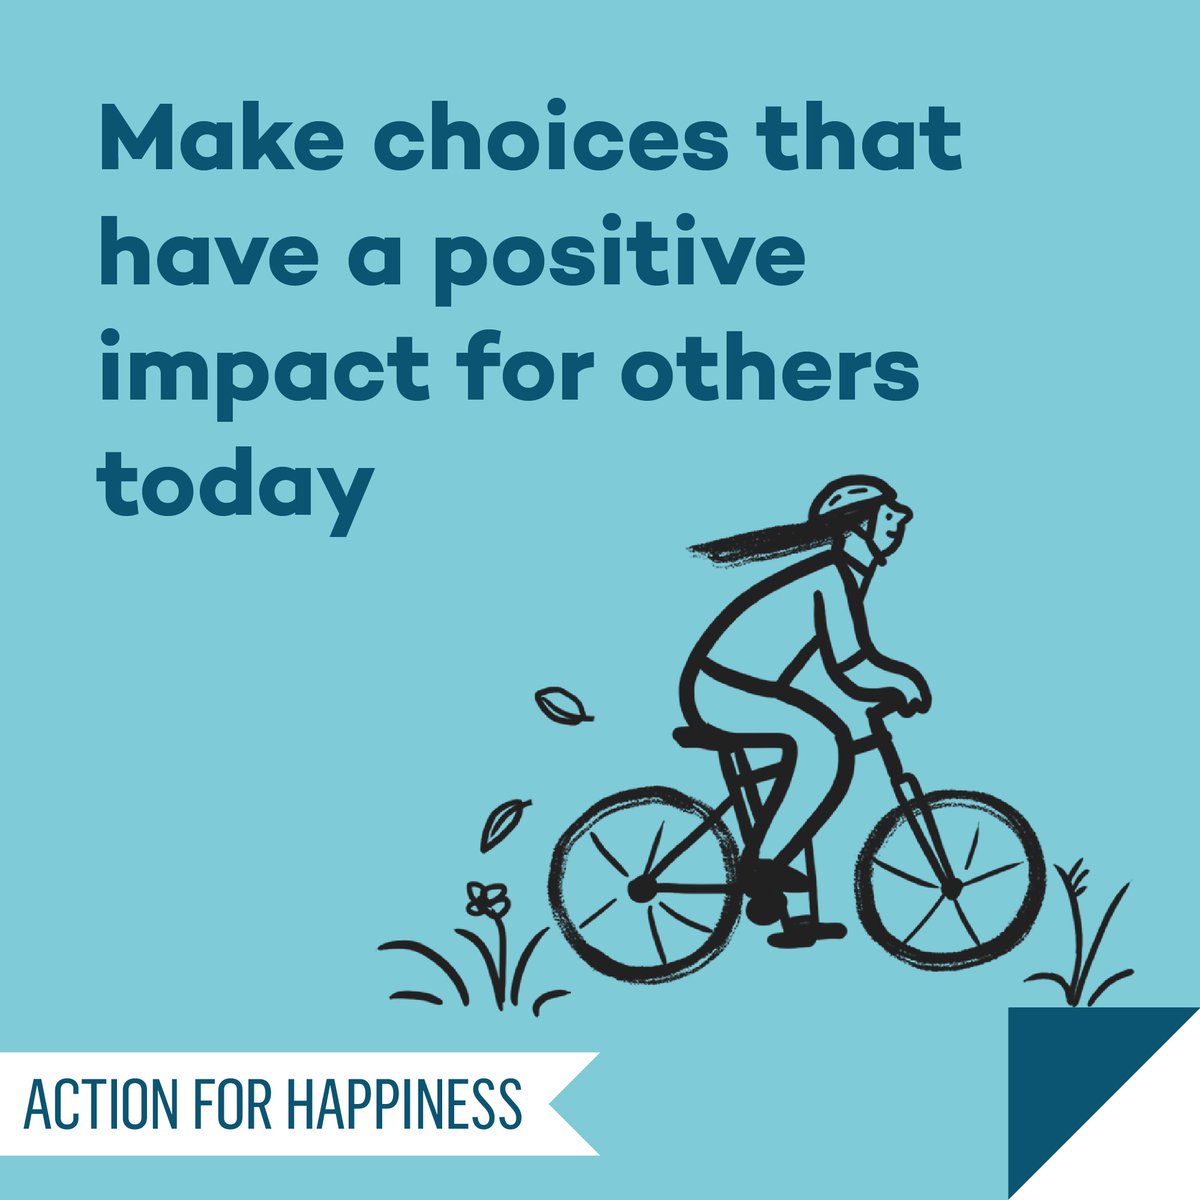 Meaningful May - Day 24: Make choices that have a positive impact for others today actionforhappiness.org/meaningful-may #MeaningfulMay